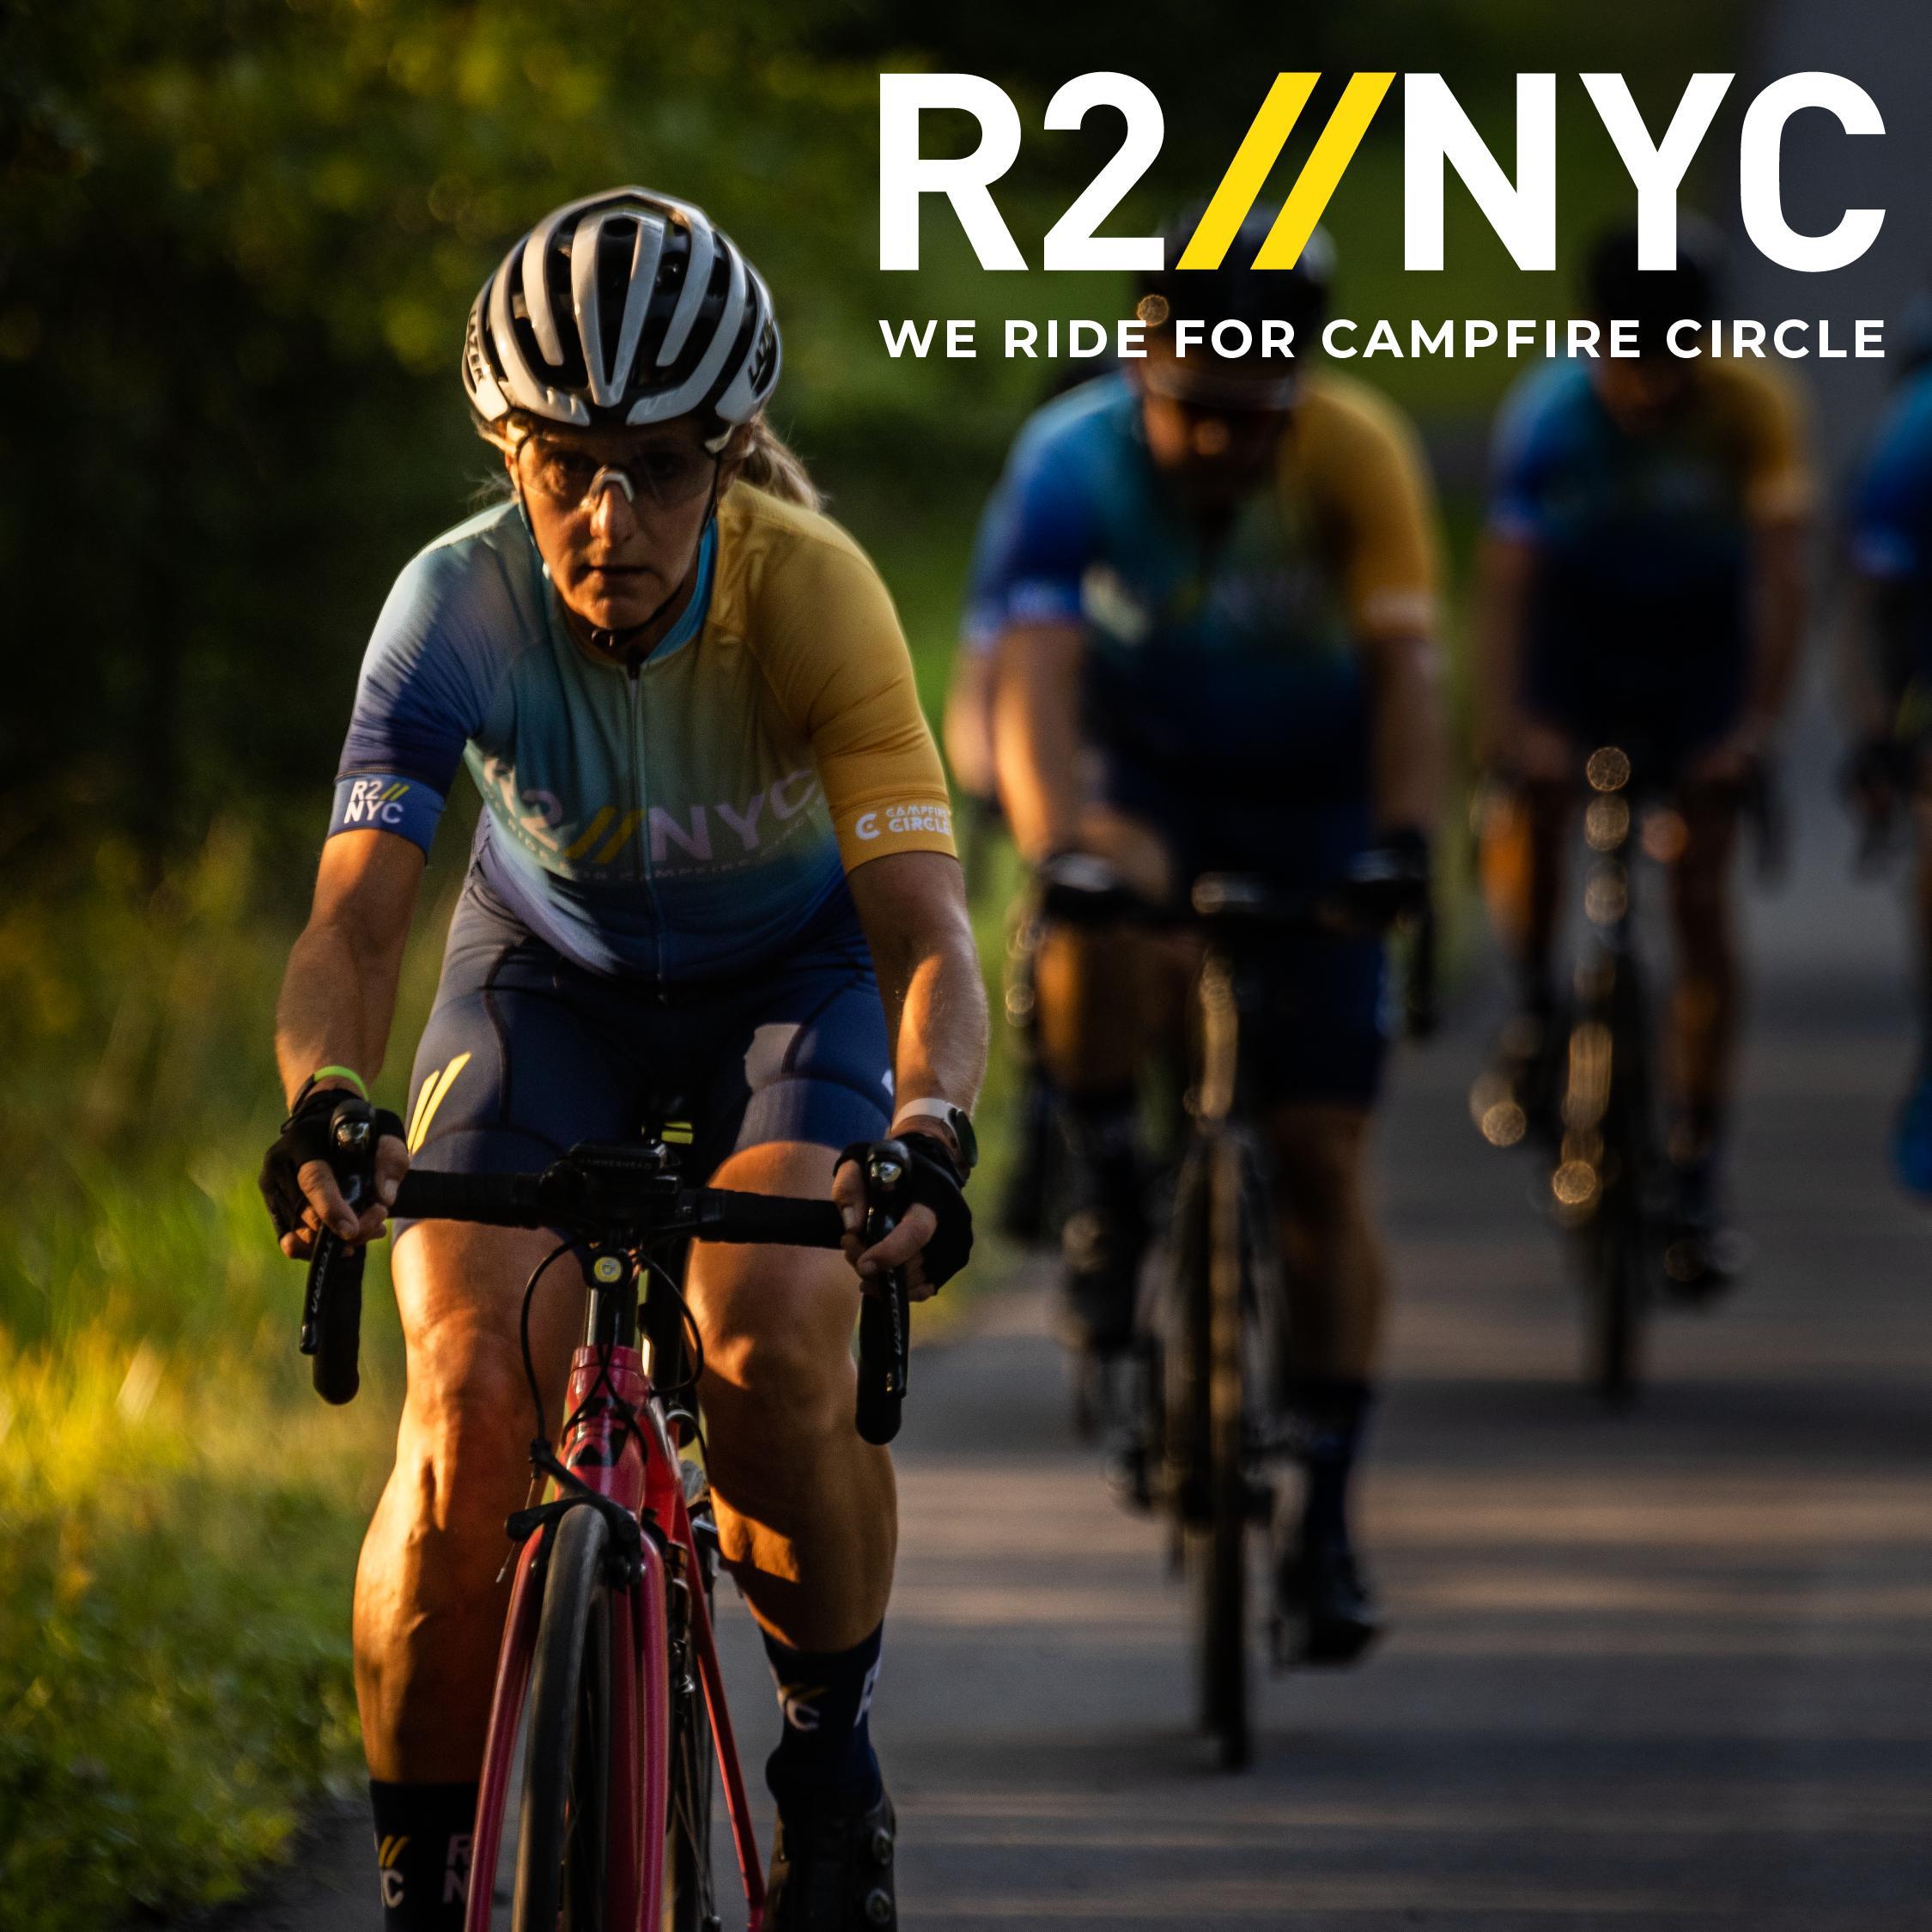 R2NYC We ride for Campfire Circle